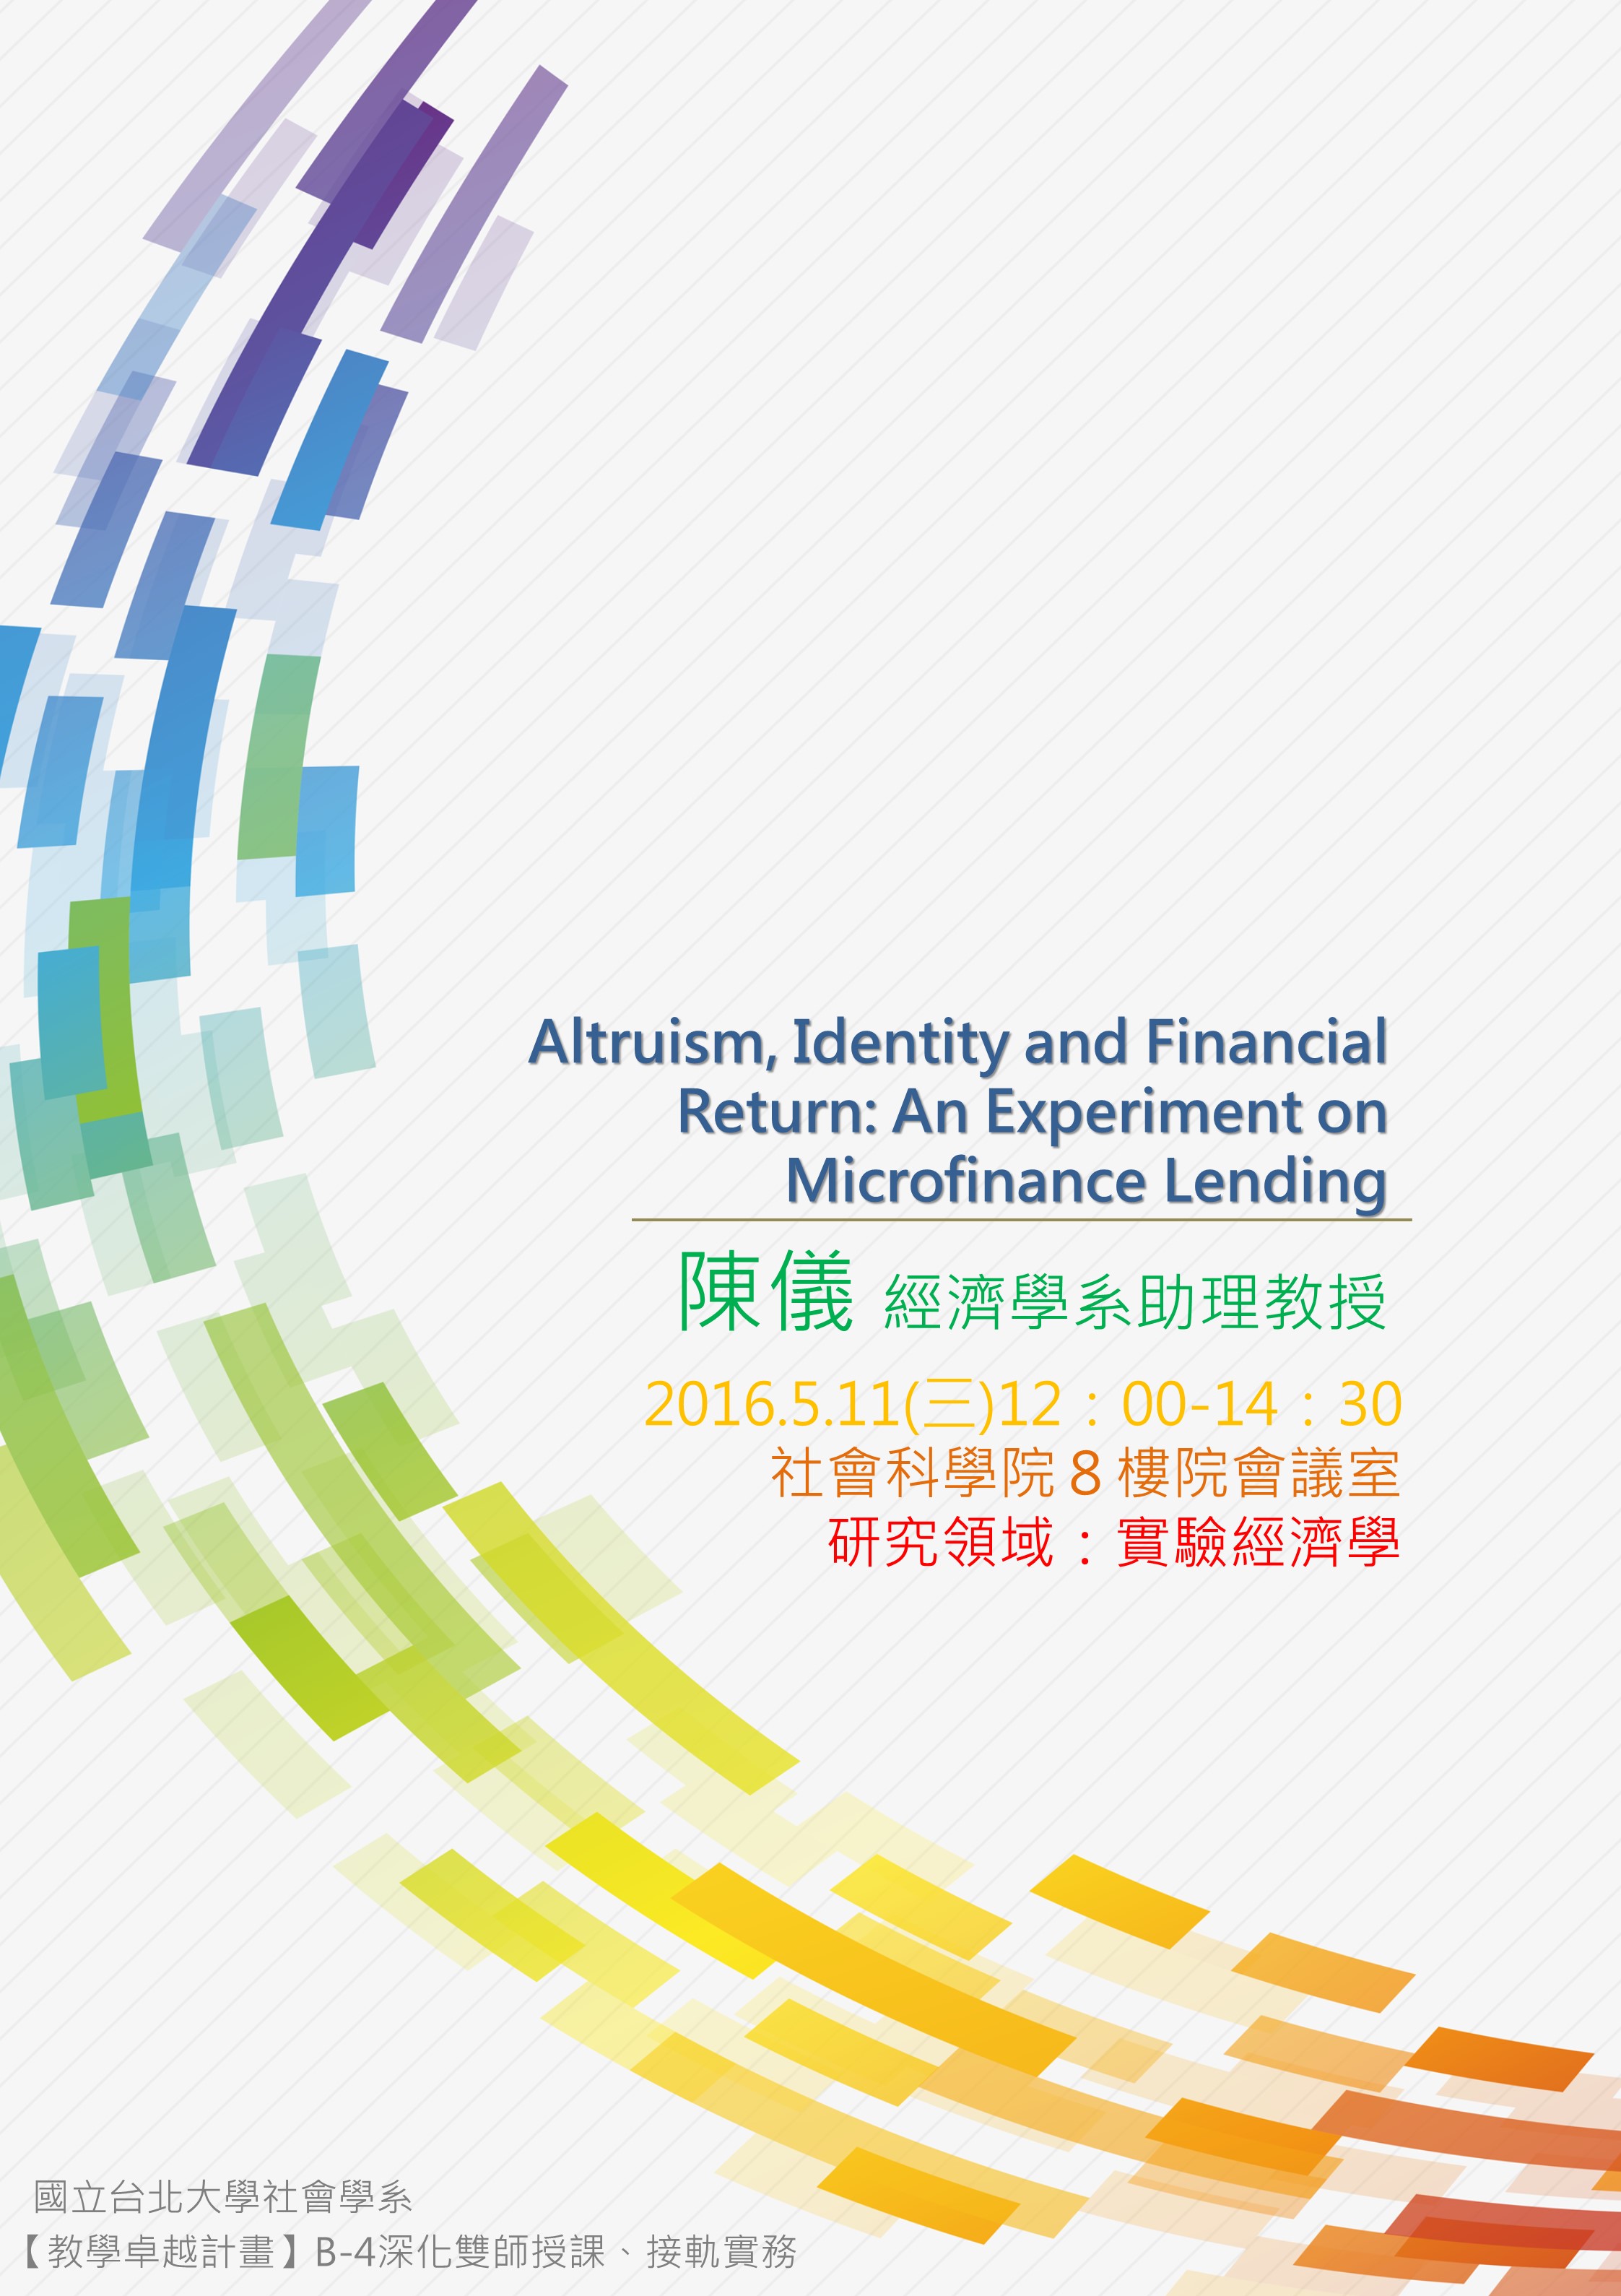 Altruism, Identity and Financial Return: An Experiment on Microfinance Lending